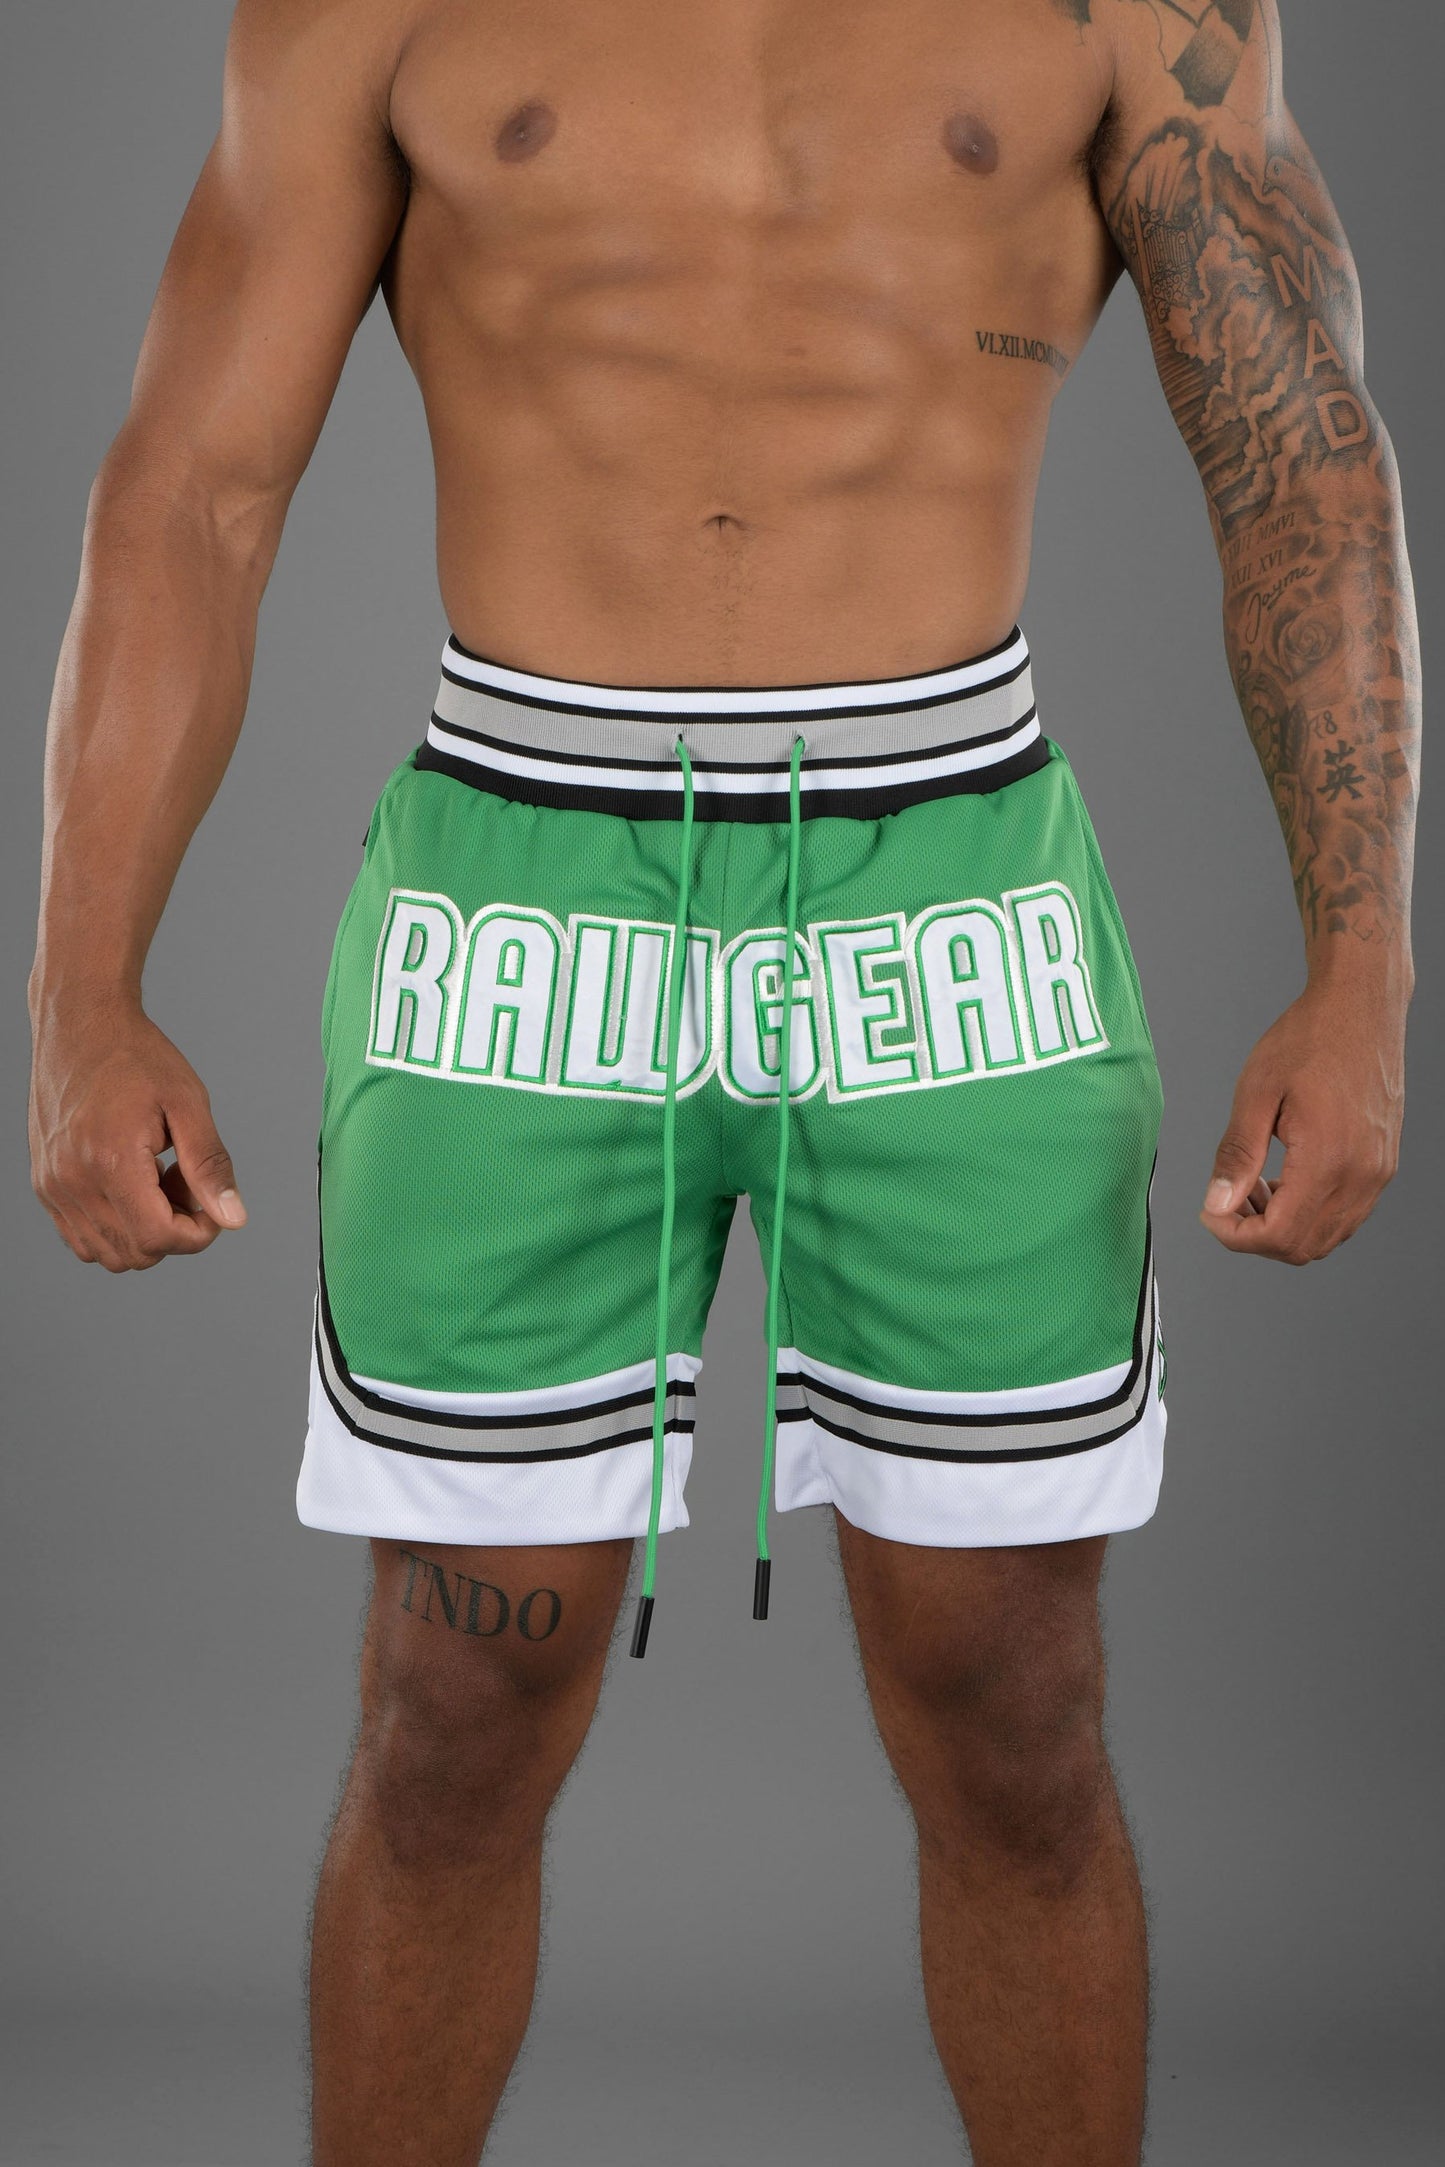 Rawgear Front Embroidery Basketball Shorts - RG108